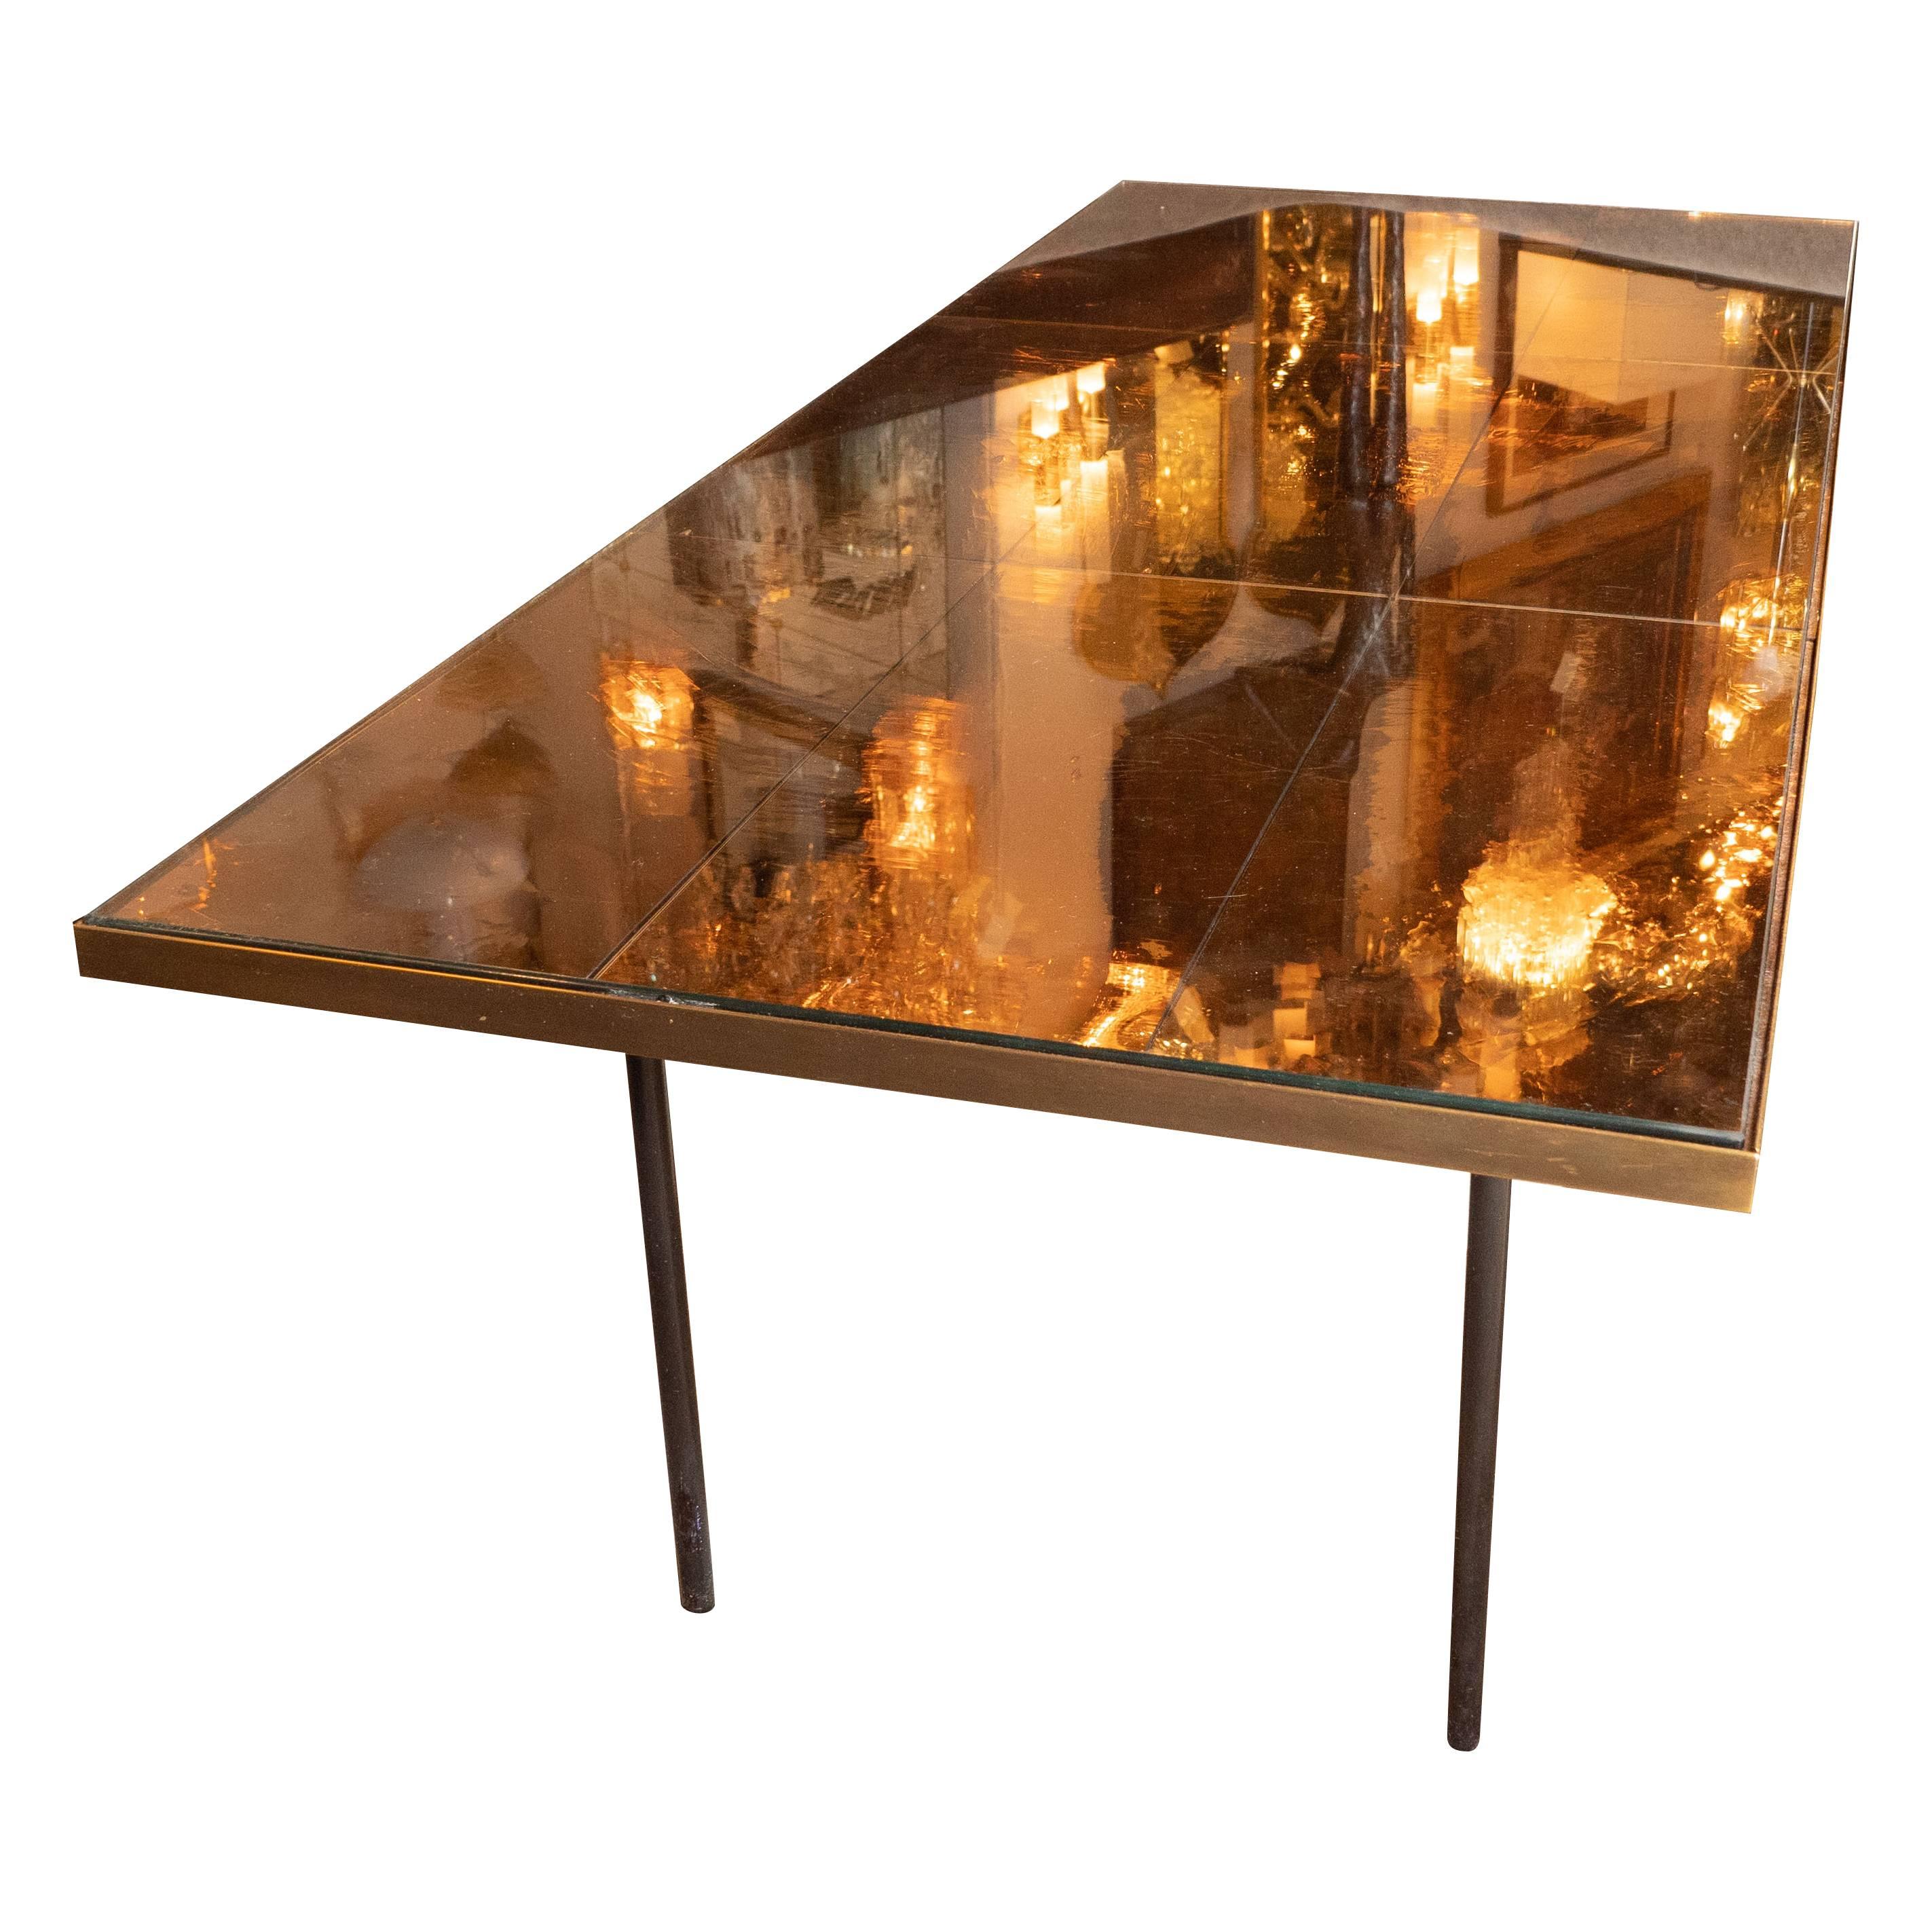 European Midcentury Art Moderne Cocktail Table in Iron and Brass Mirror by Fontana Arte